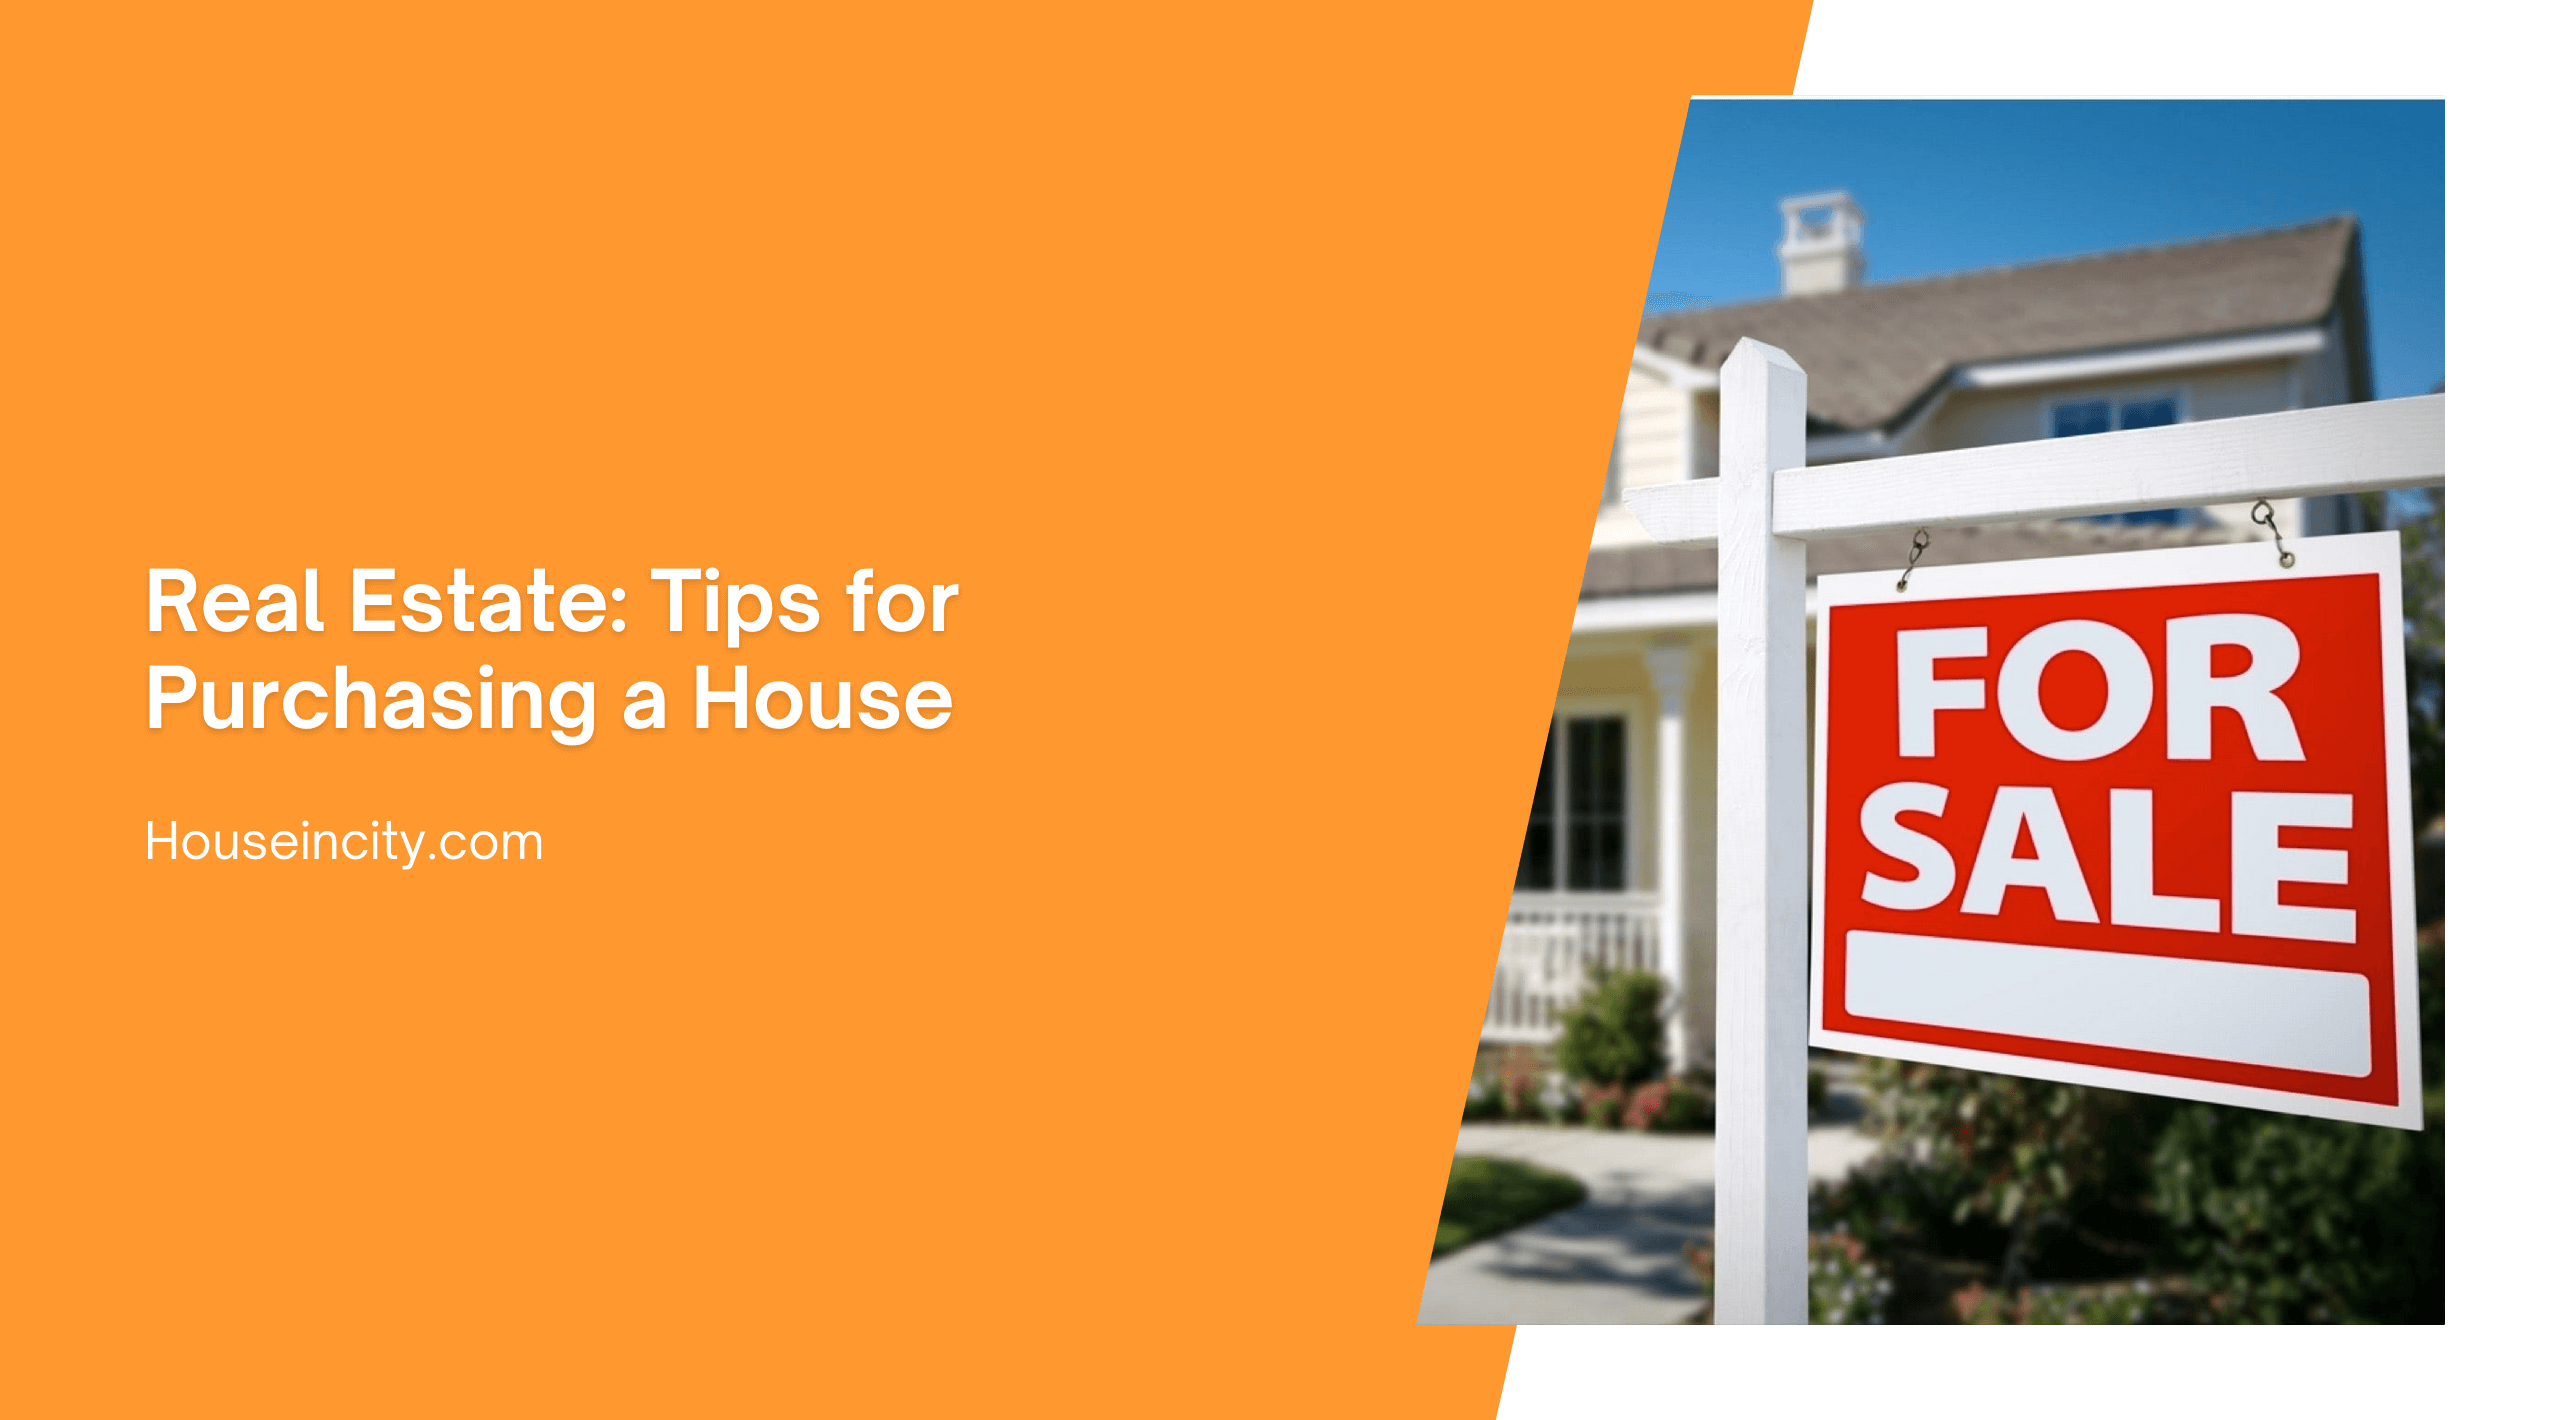 Real Estate: Tips for Purchasing a House